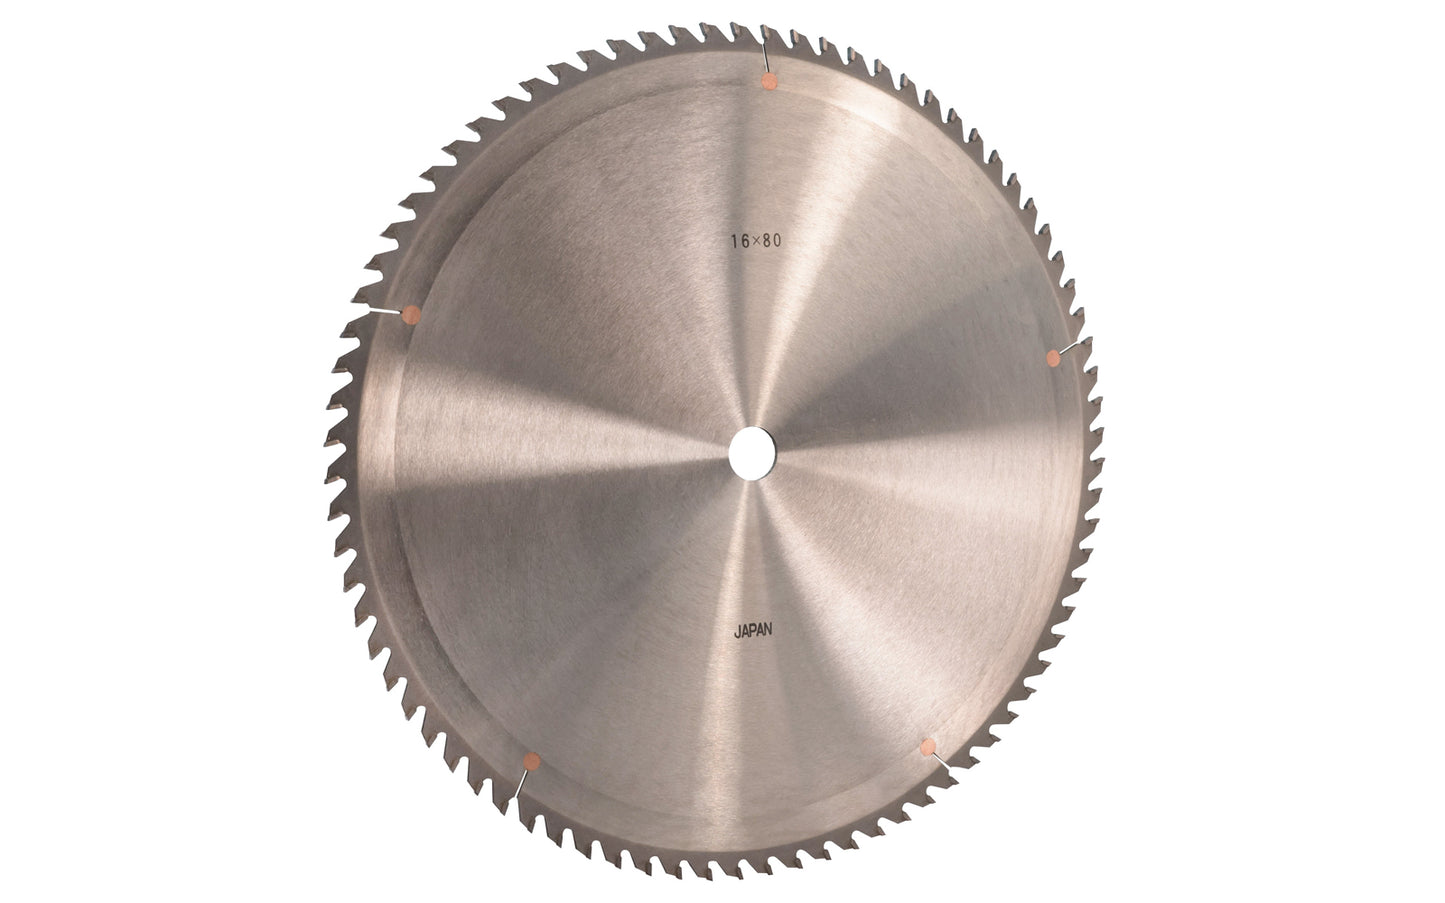 Japanese Sanwa 16" circular saw blade with carbide teeth - 80 Tooth. 80 tooth thin saw blade for woodworking. Grind: TCG saw blade - Triple Chip Grind. 0.16" kerf blade. 25 mm arbor hole. Carbide tooth. 1" (25 mm) arbor hole. Alternate tooth bevel blade. Sanwa model ST1680. Made in Japan.